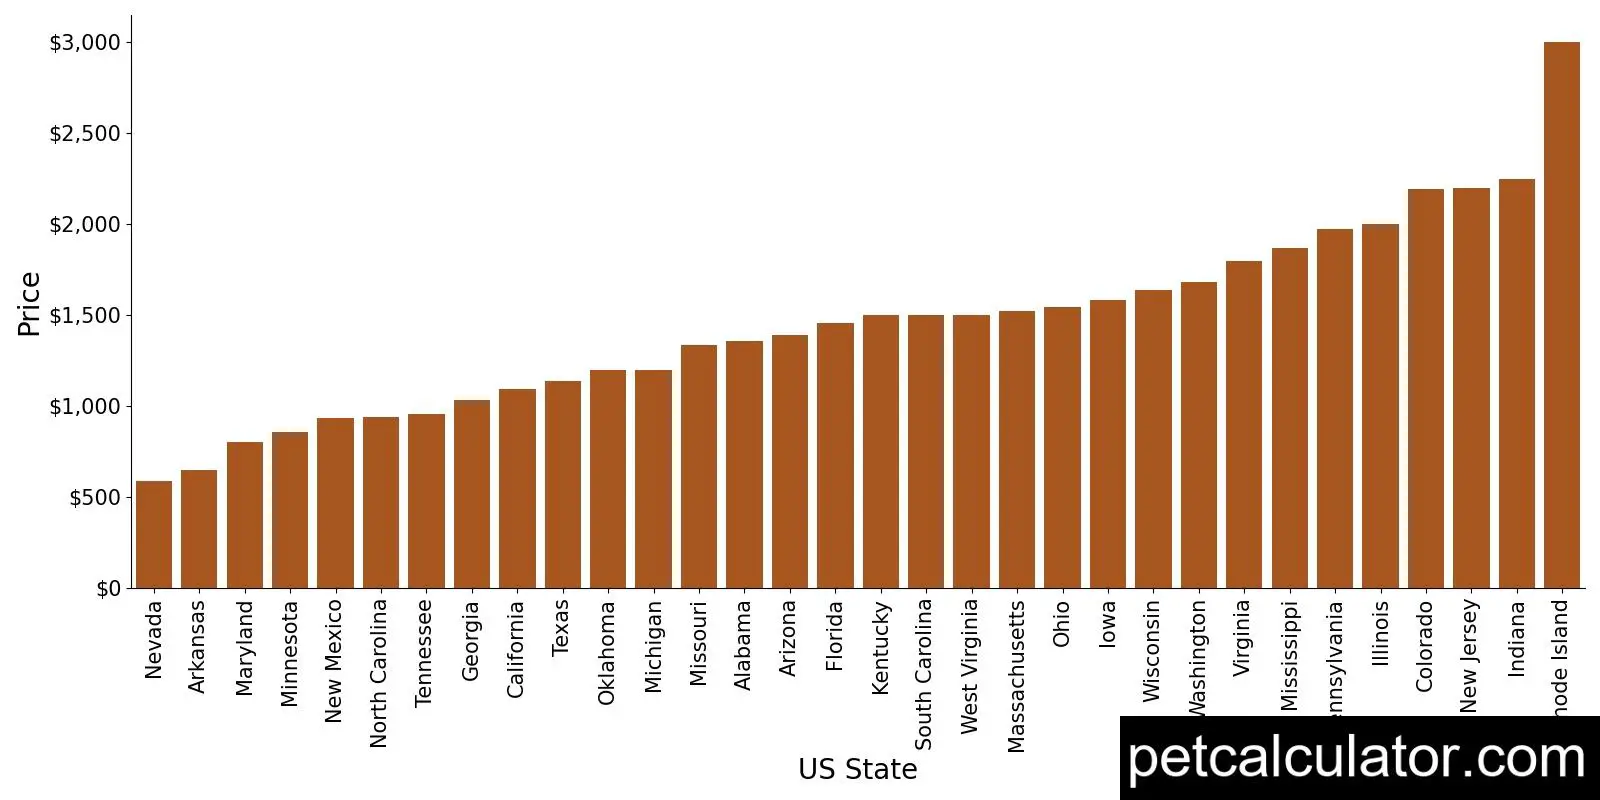 Price of Belgian Malinois by US State 